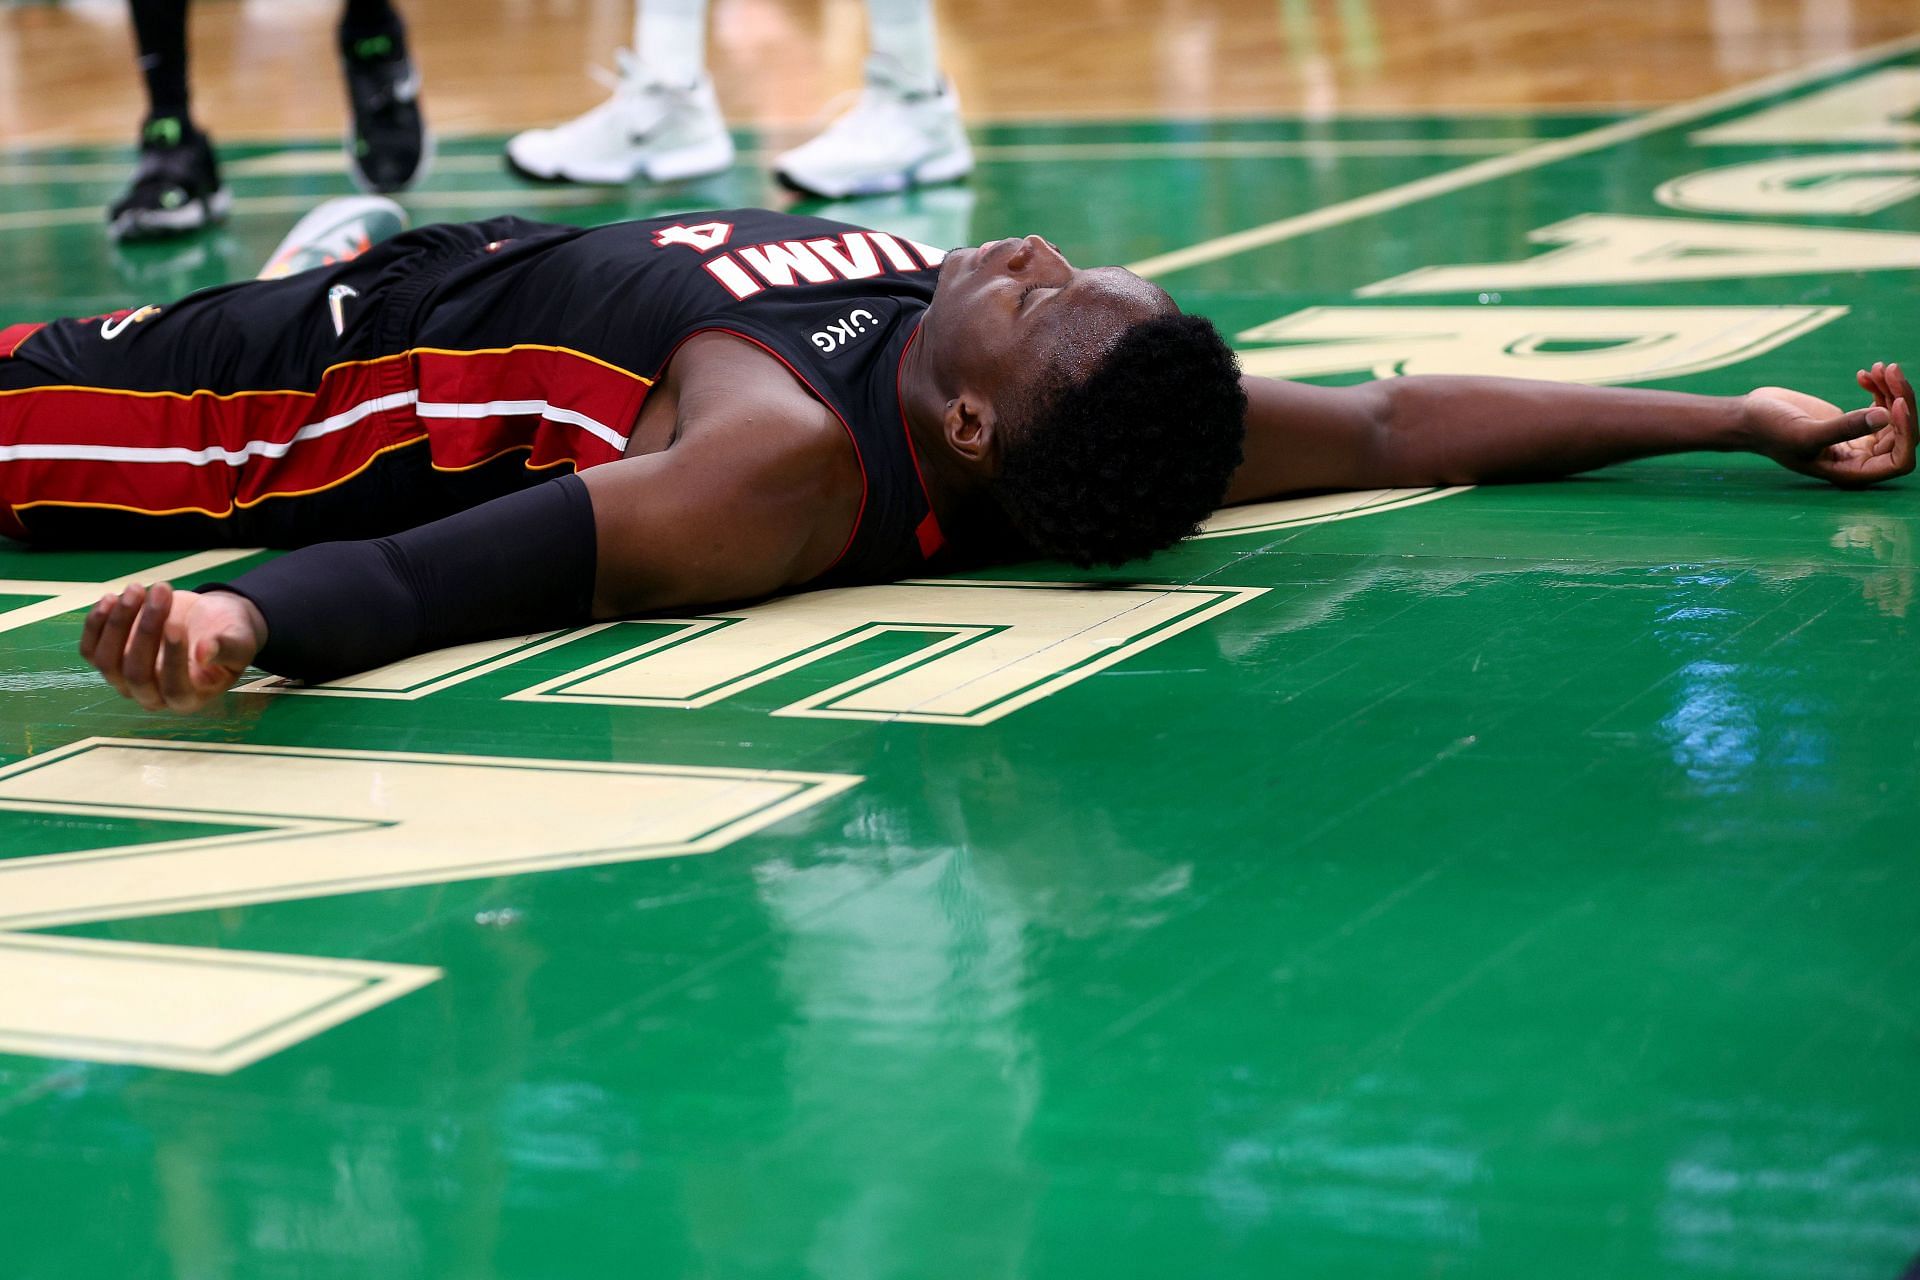 Victor Oladipo lays on the floor after a play.